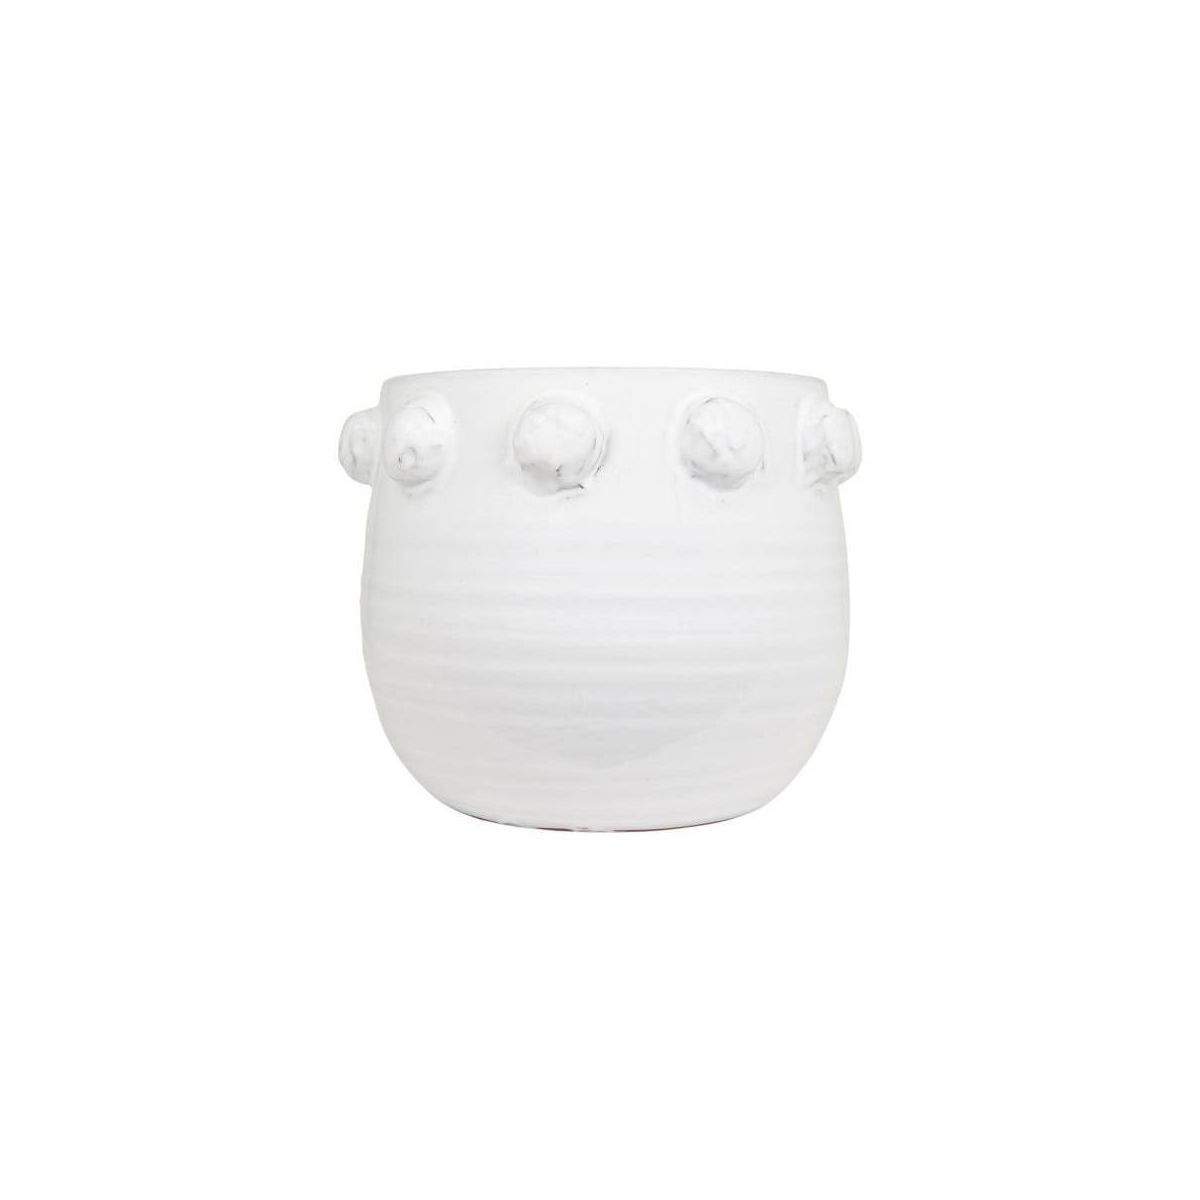 9" x 11" Terracotta Planter with Bubble Design White - Storied Home | Target